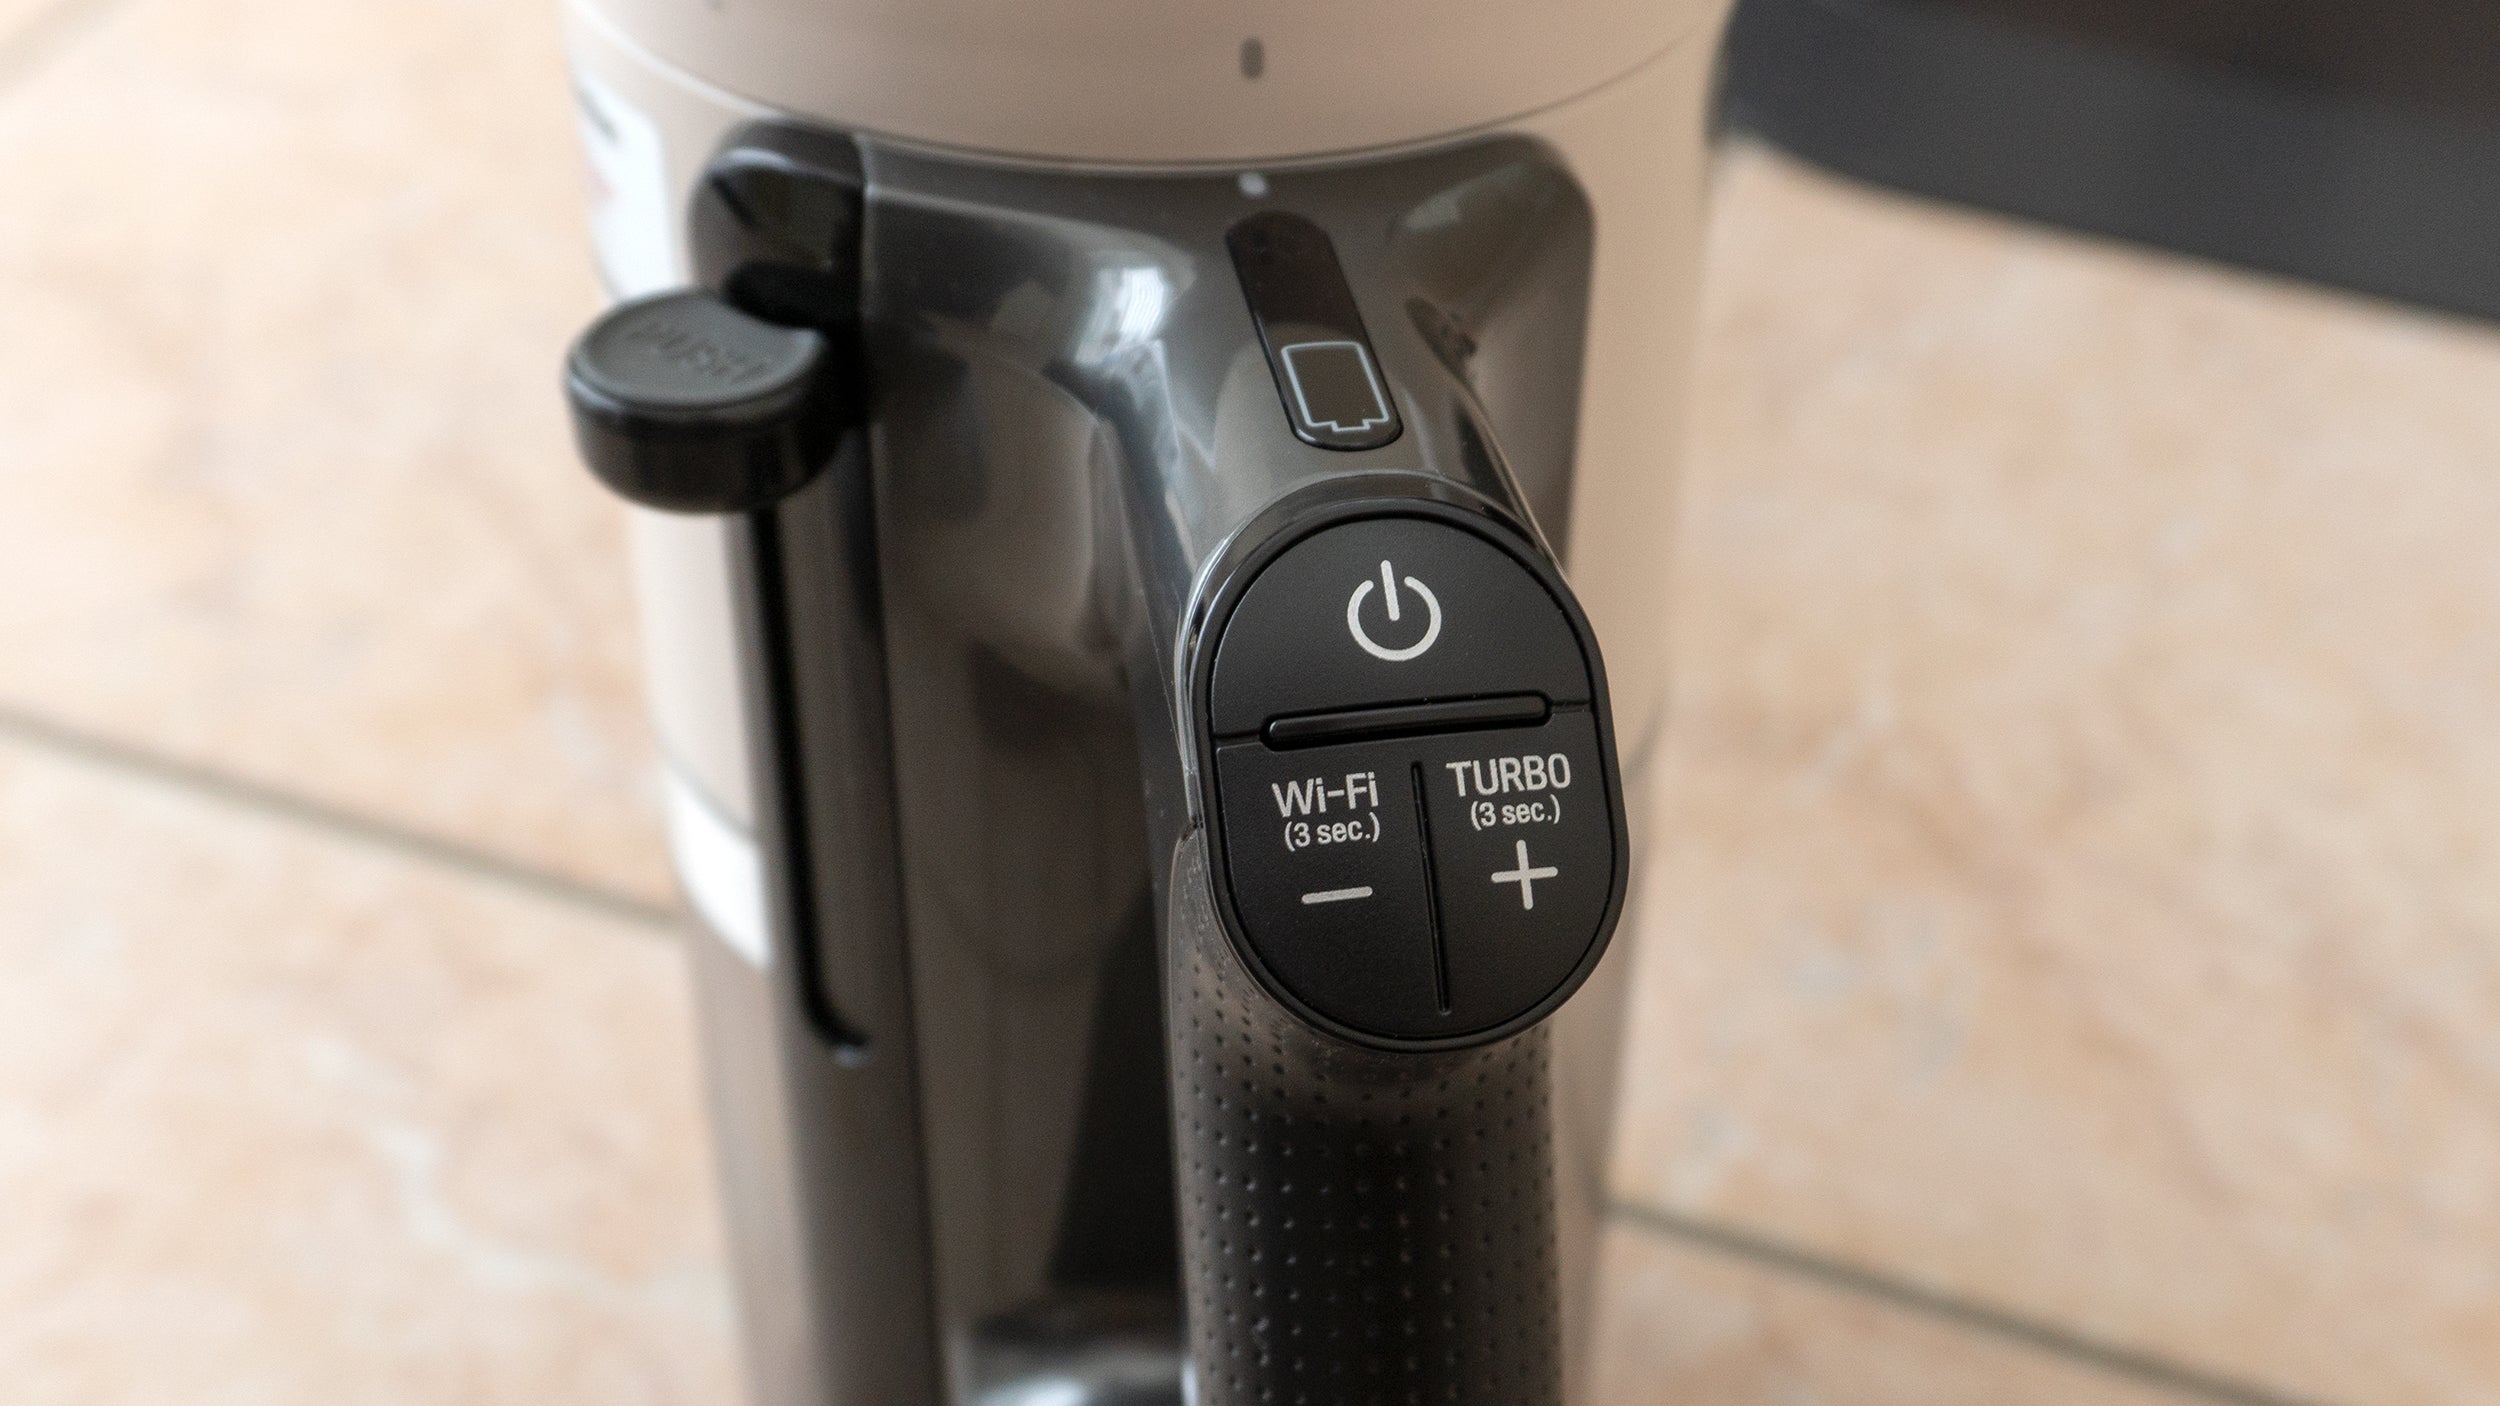 Instead of a trigger that needs to be constantly squeezed, the A9 Kompressor+ uses on/off power buttons, making it more comfortable to use during longer cleaning sessions. (Photo: Andrew Liszewski/Gizmodo)